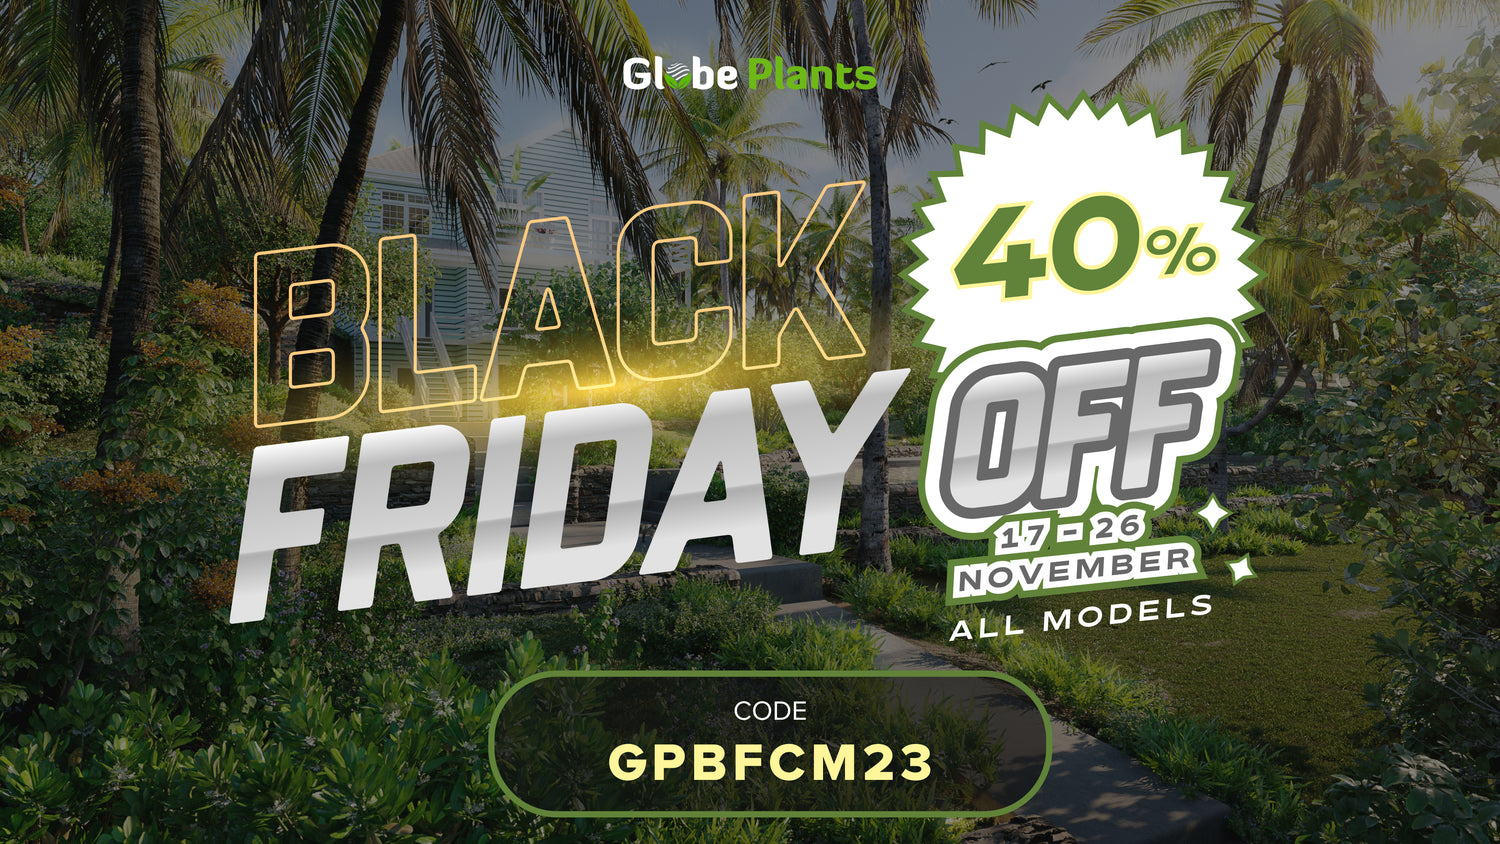 Transform Your 3D Spaces with Globe Plants' Black Friday & Cyber Monday Deals